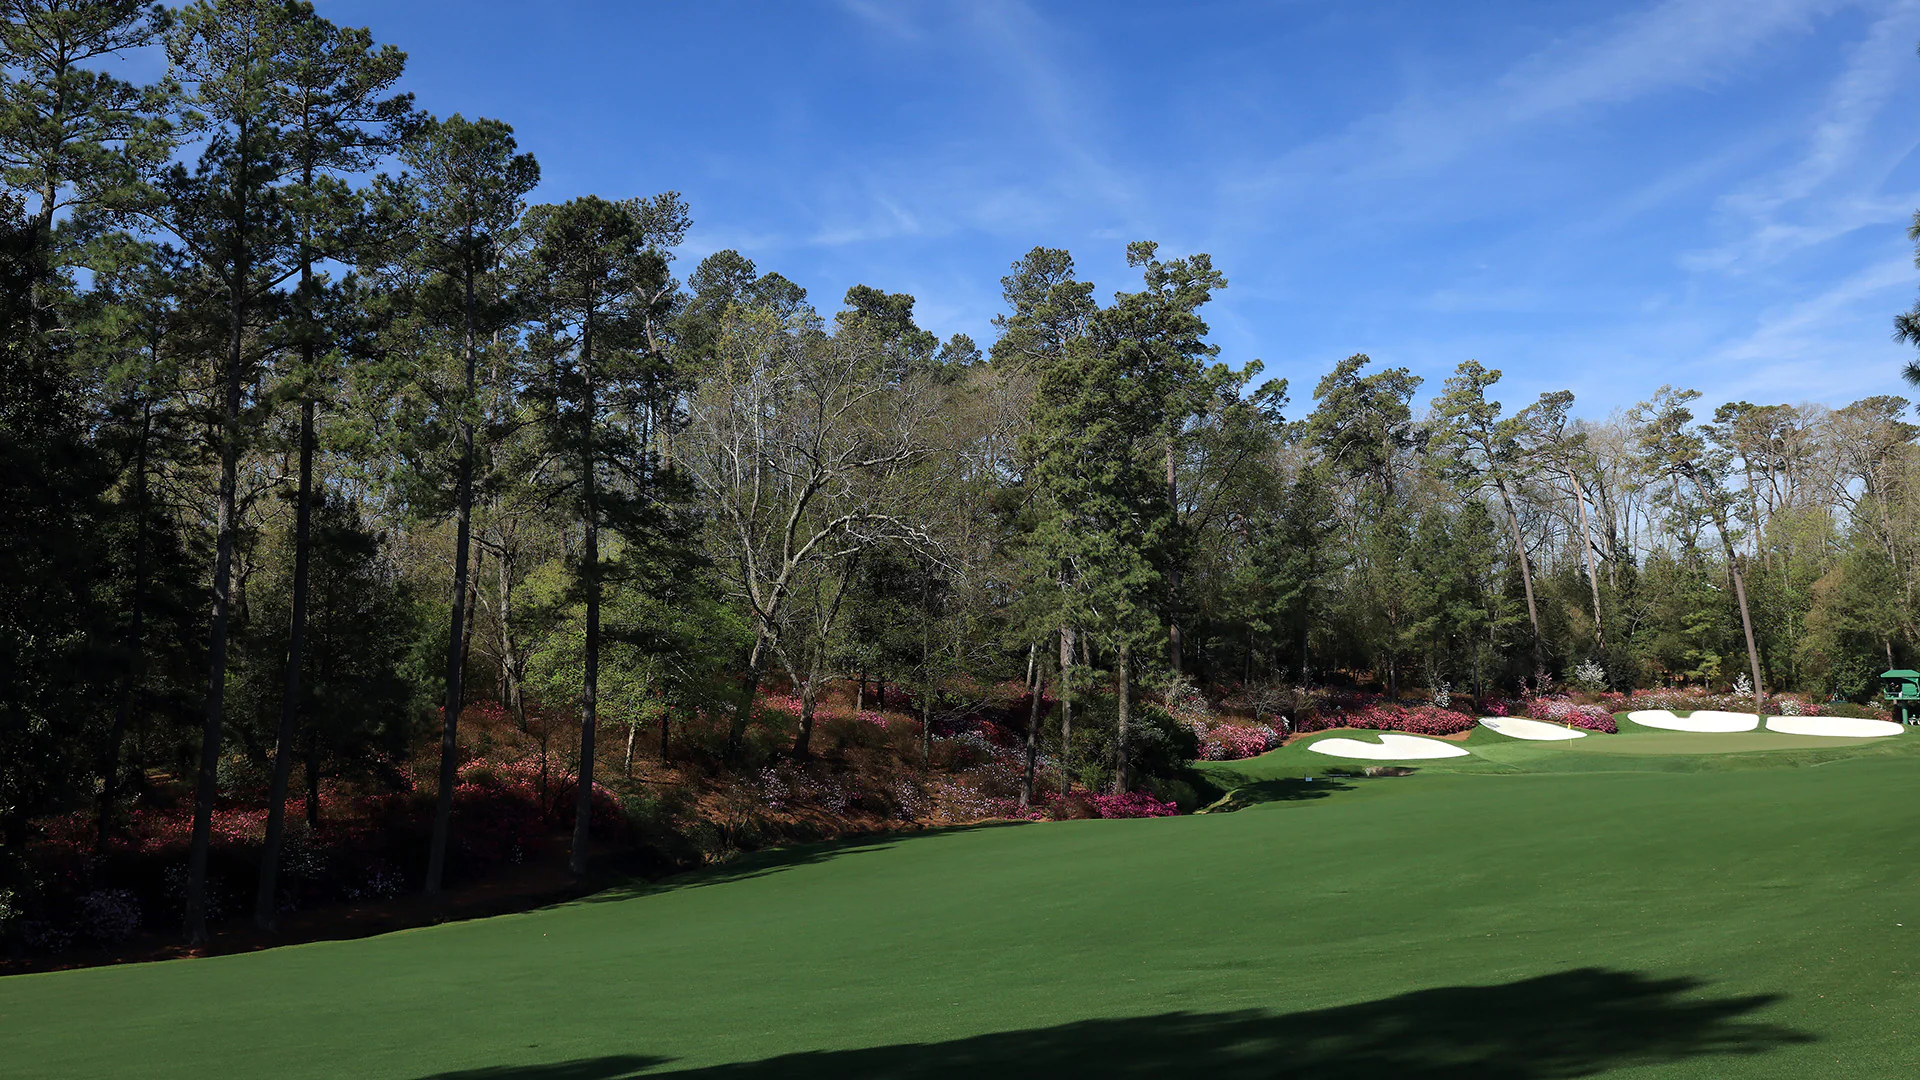 New photos show big changes coming to the famous par-5 13th hole at Augusta National